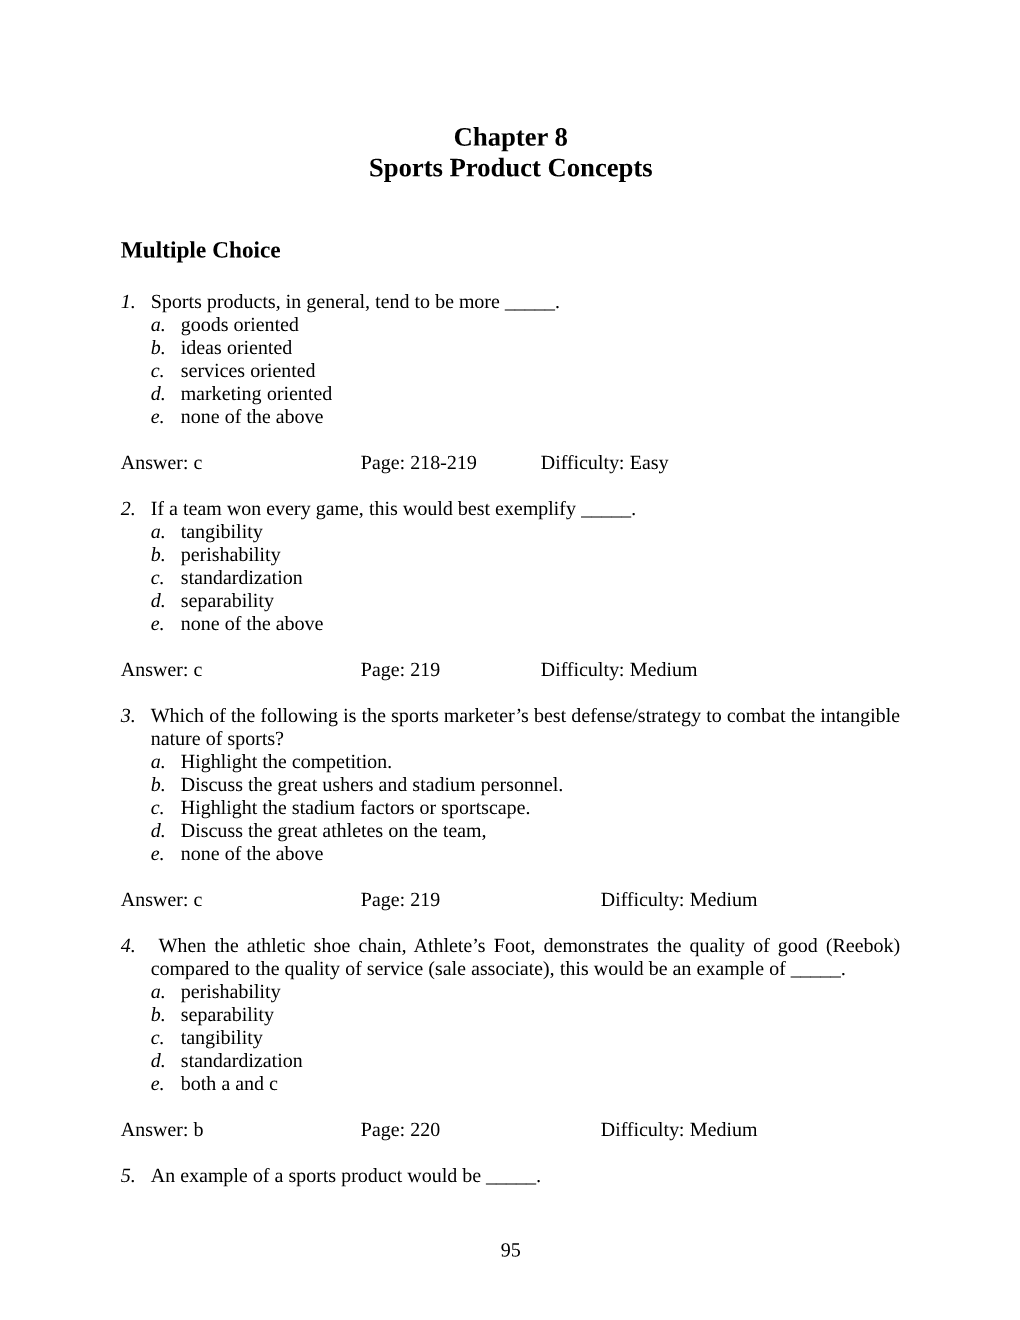 CHAPTER 8: Sports Product Concepts